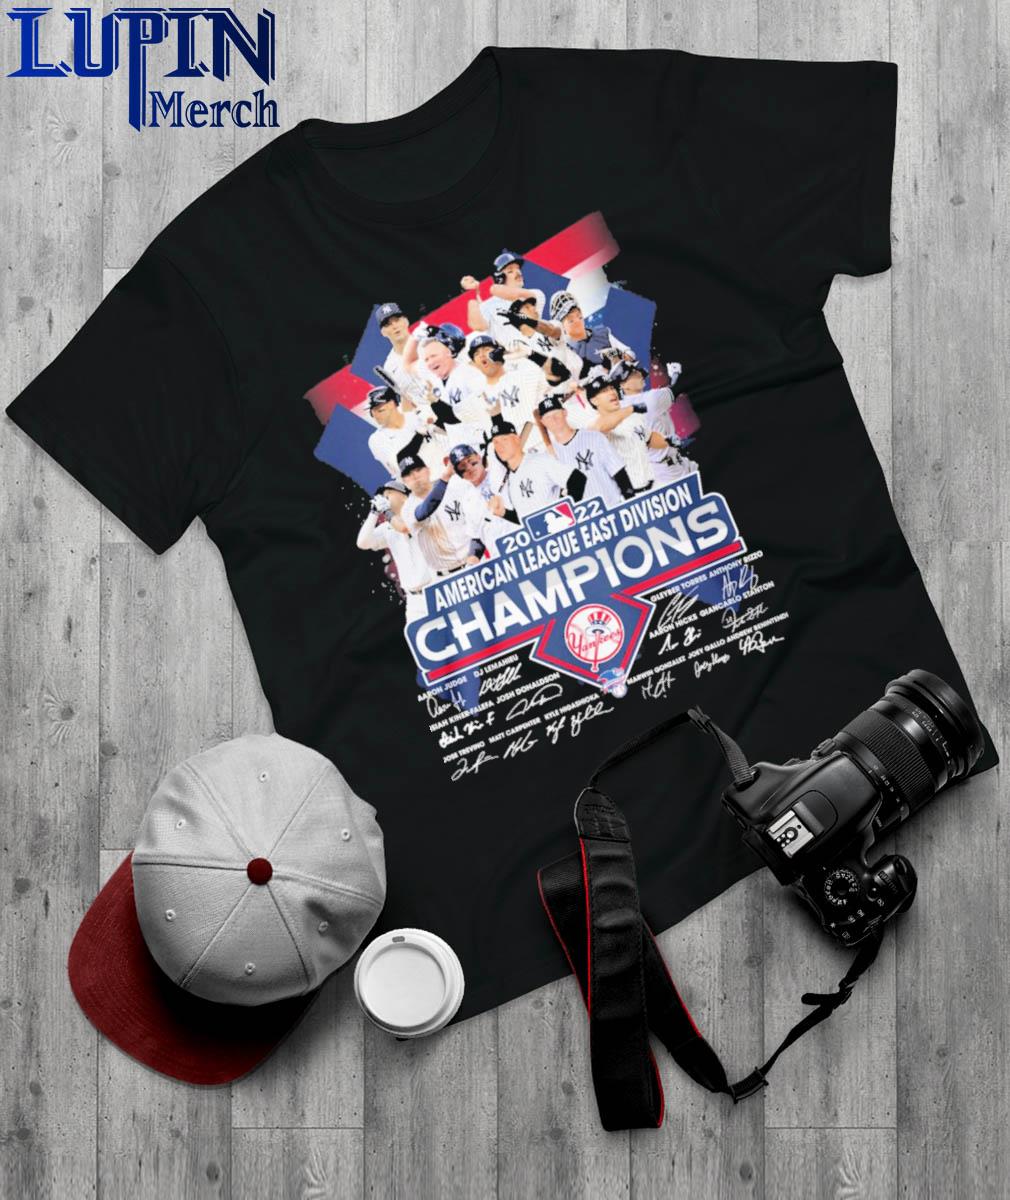 New york yankees al east division champions signatures 2022 shirt, hoodie,  sweater, long sleeve and tank top